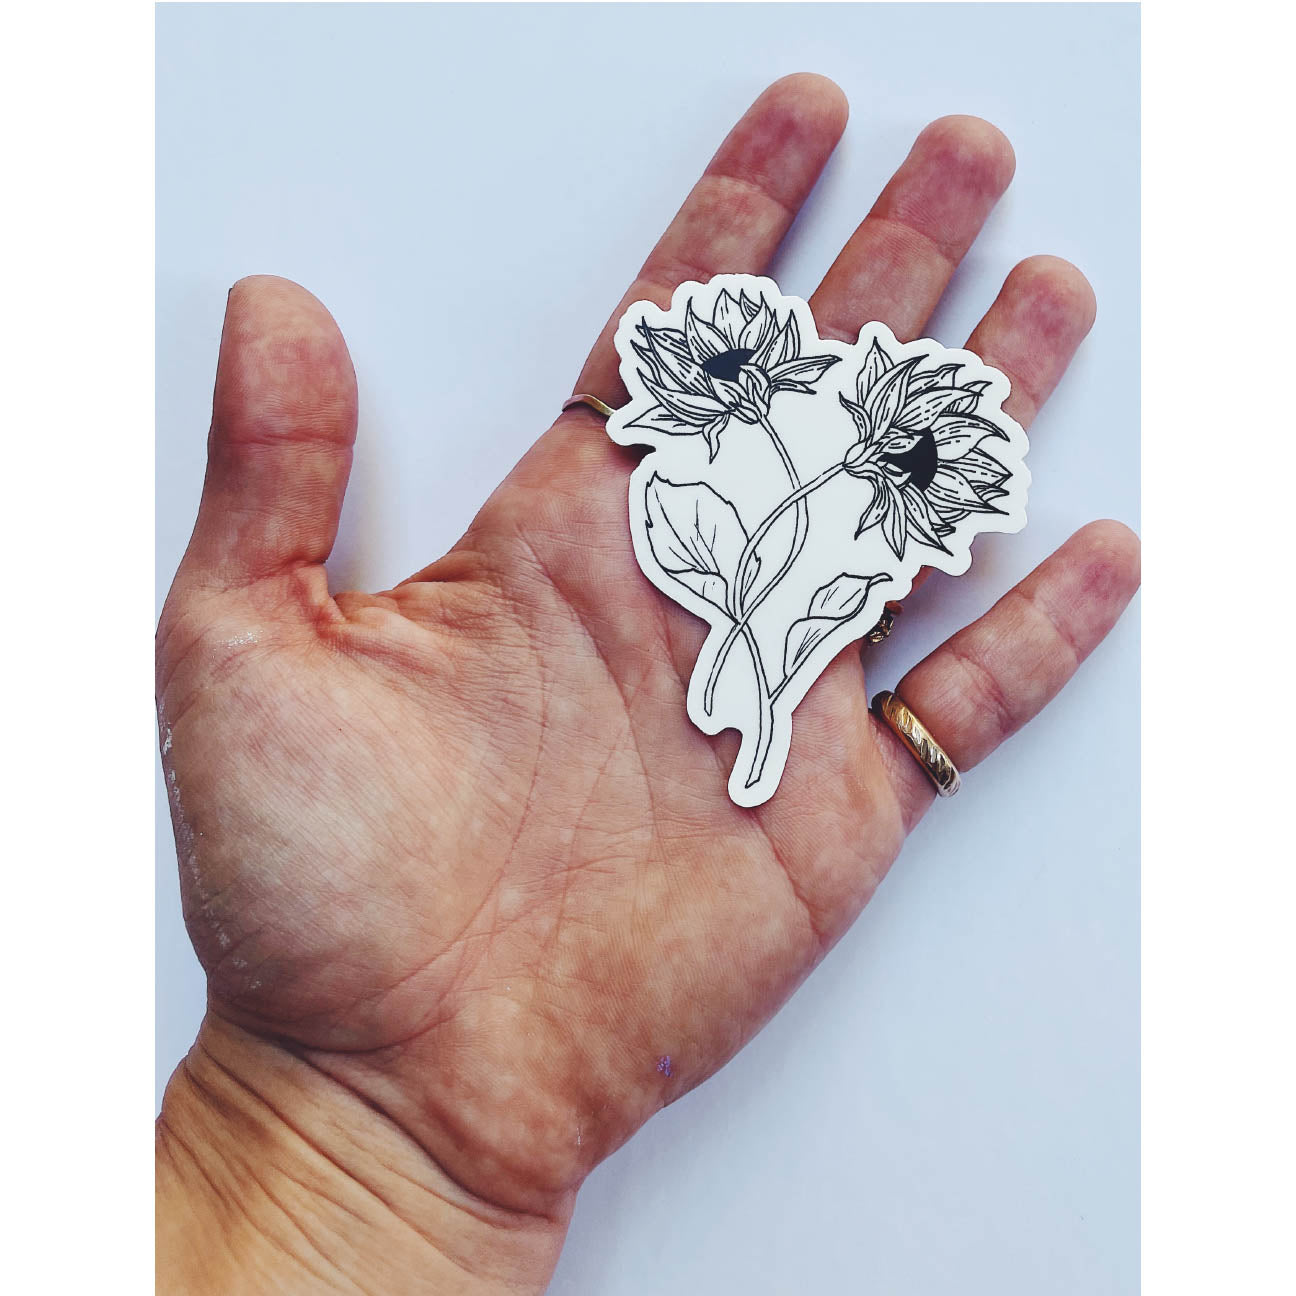 Entwined Floral Sticker